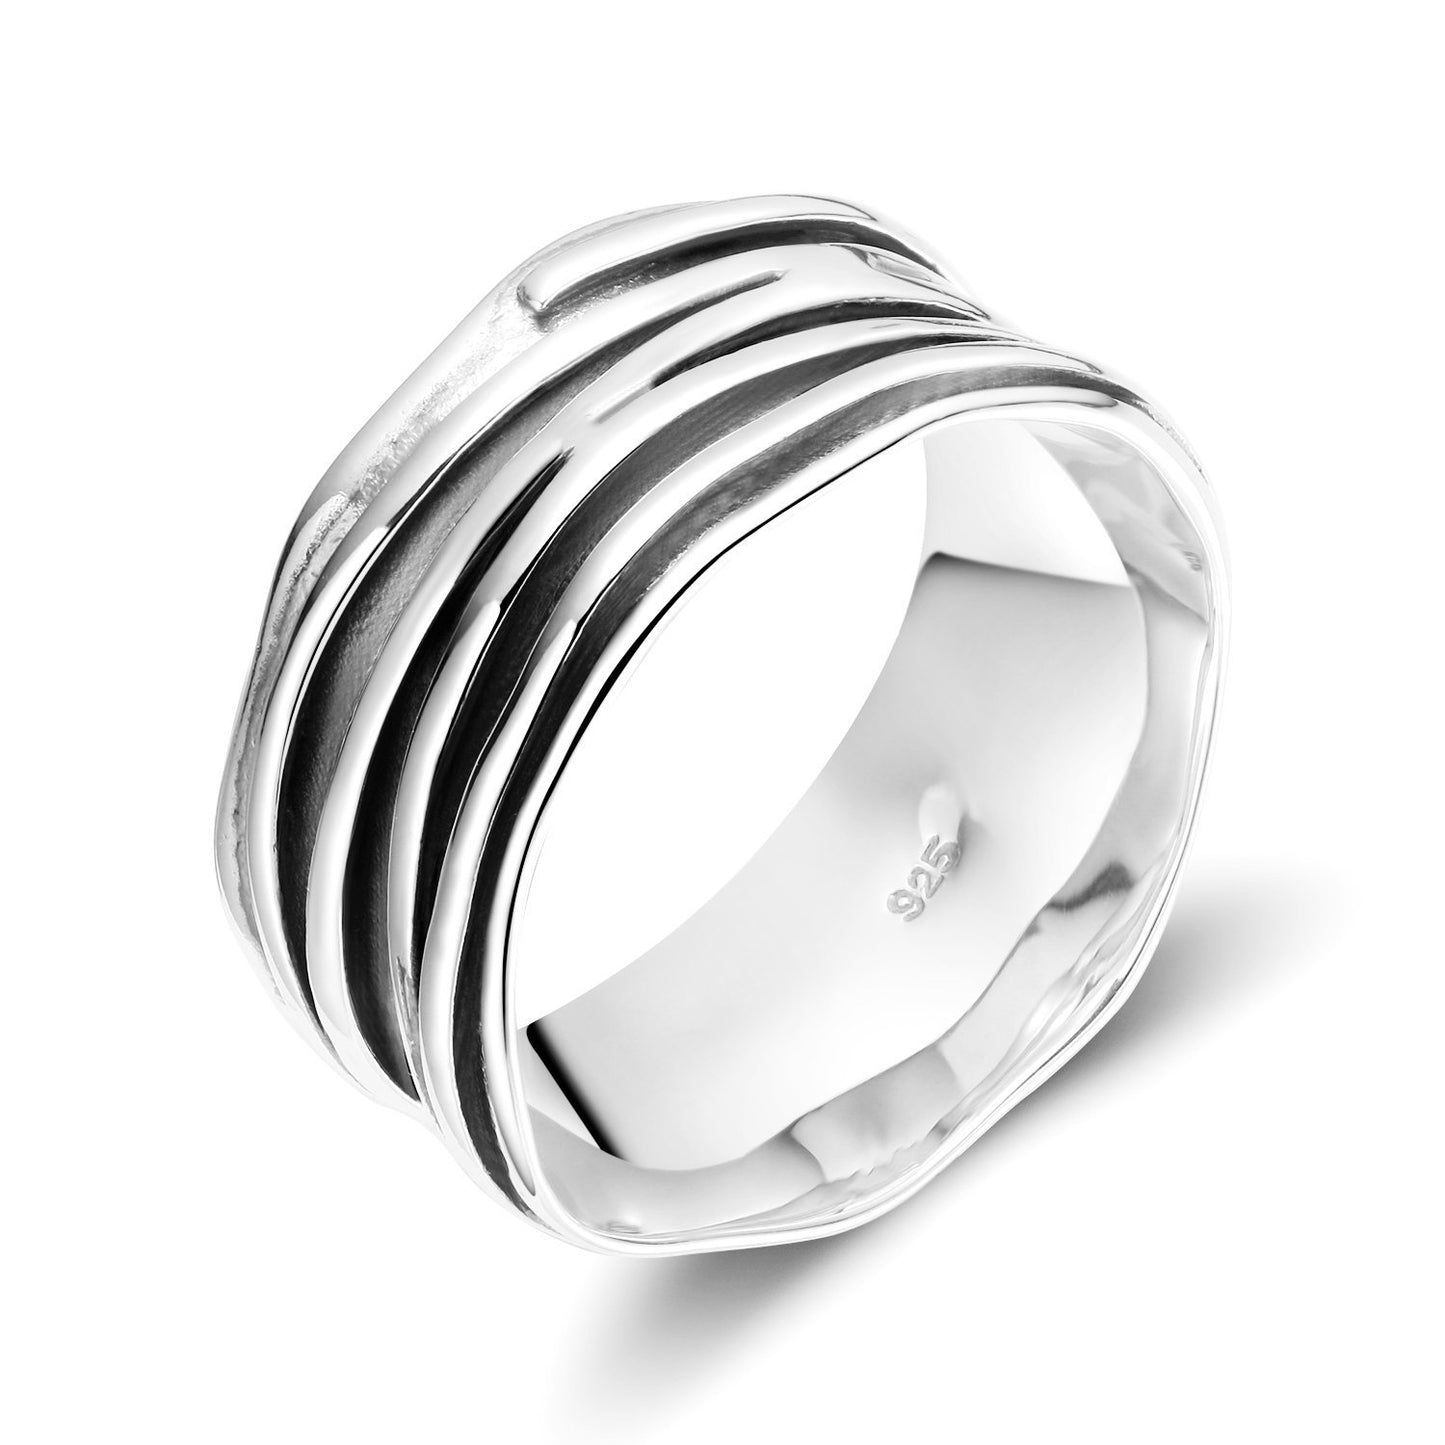 10mm Wide Band Ring 925 Sterling Silver Ripple Thumb Ring for Men